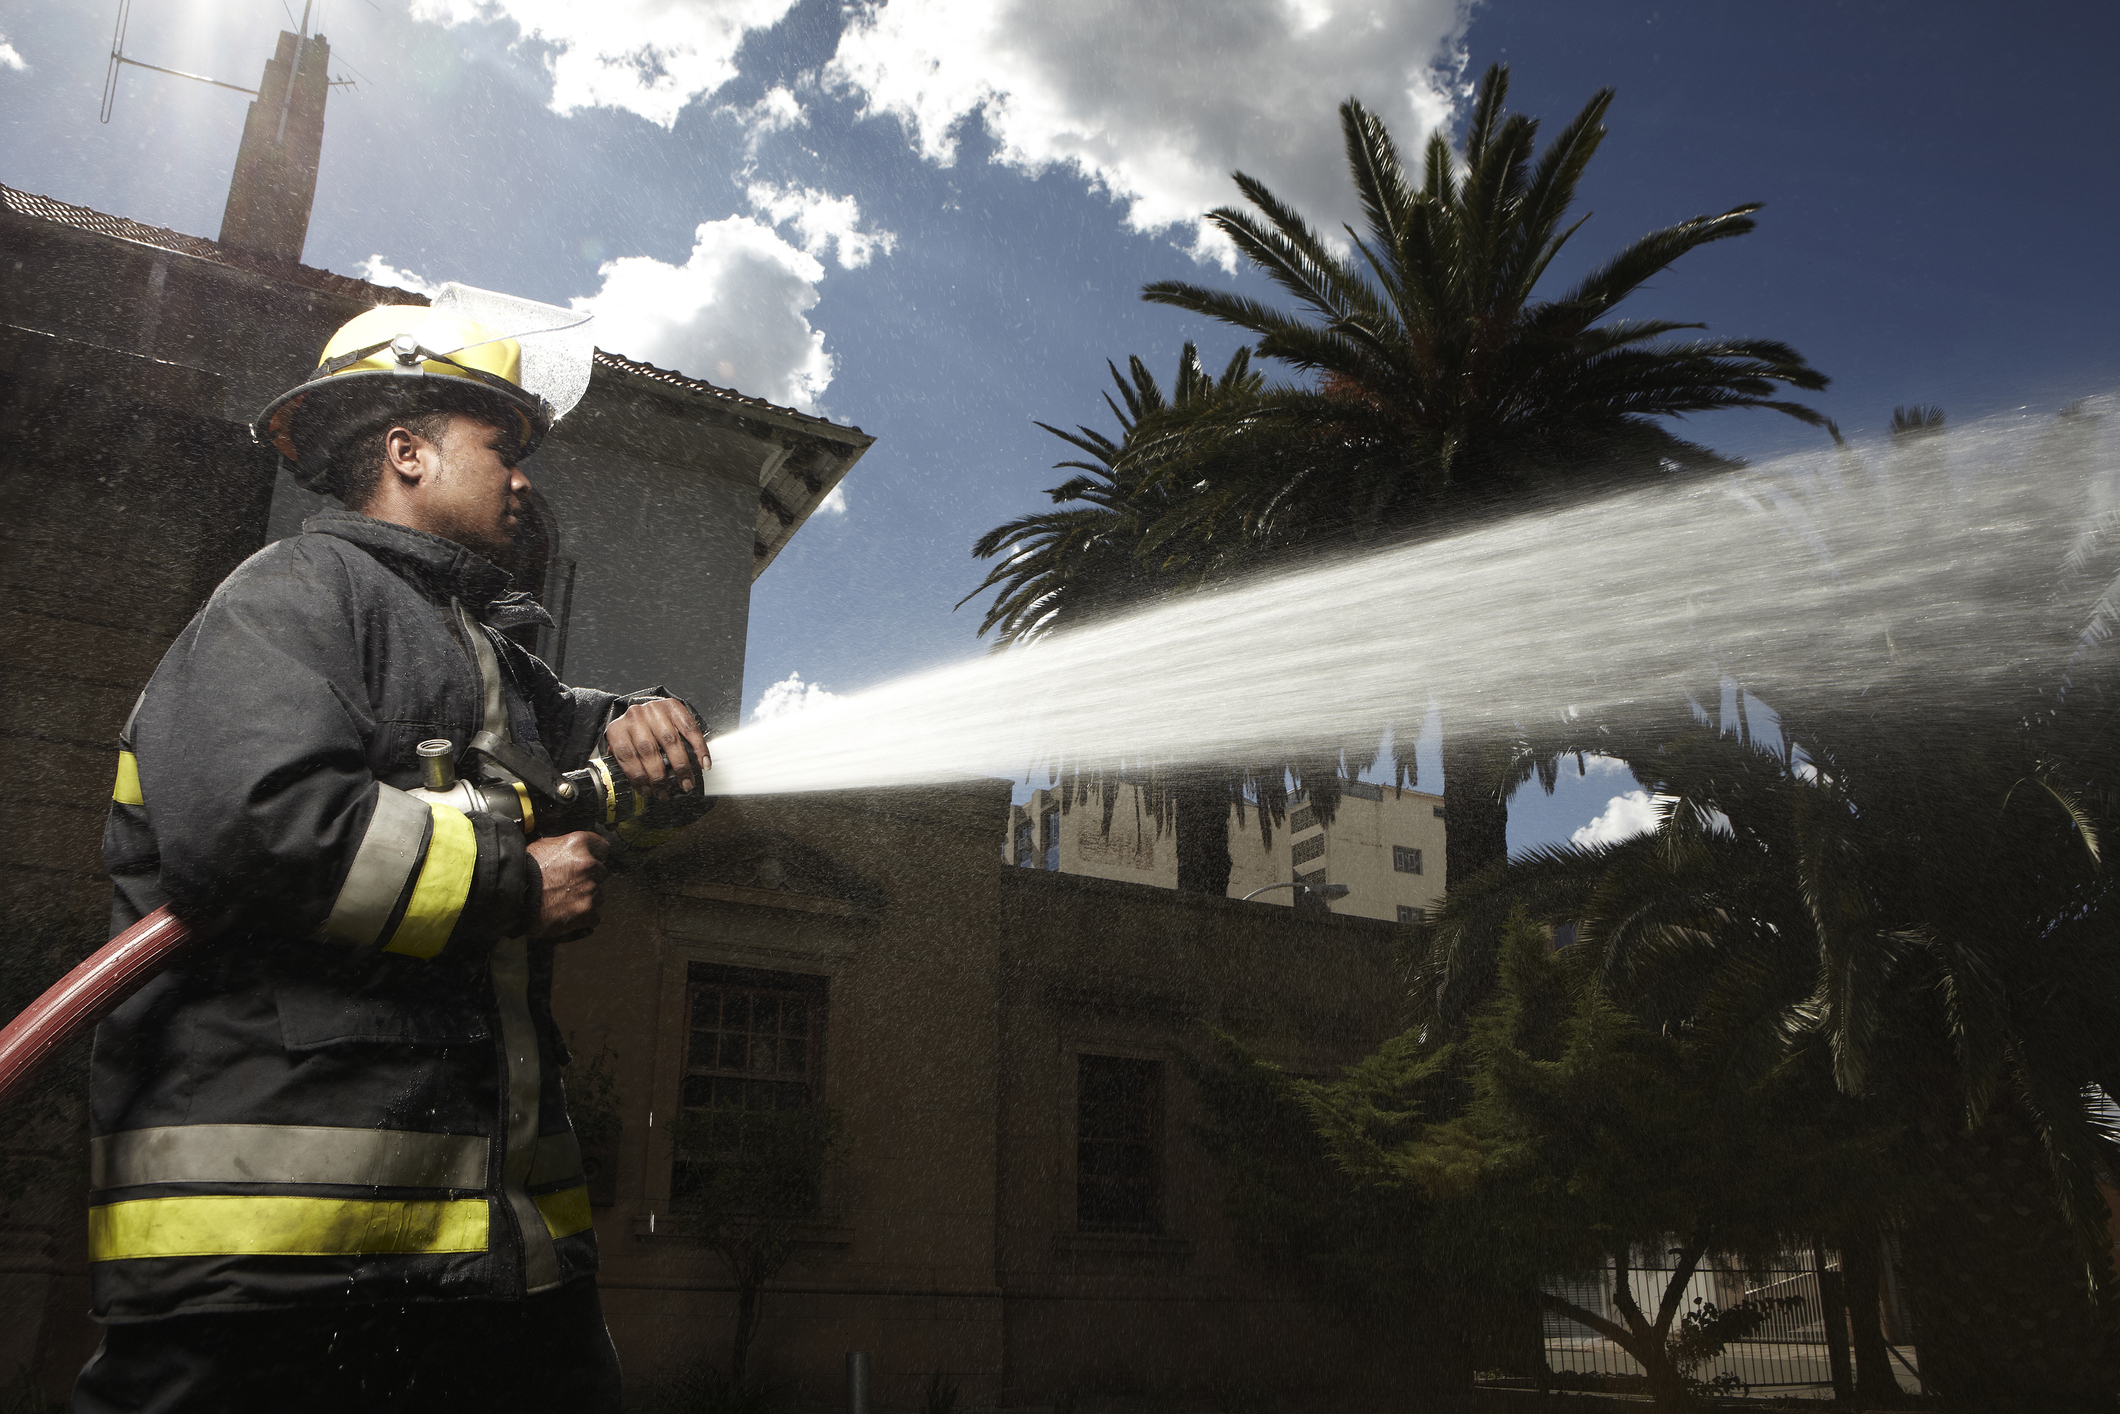 A firefighter using the hose